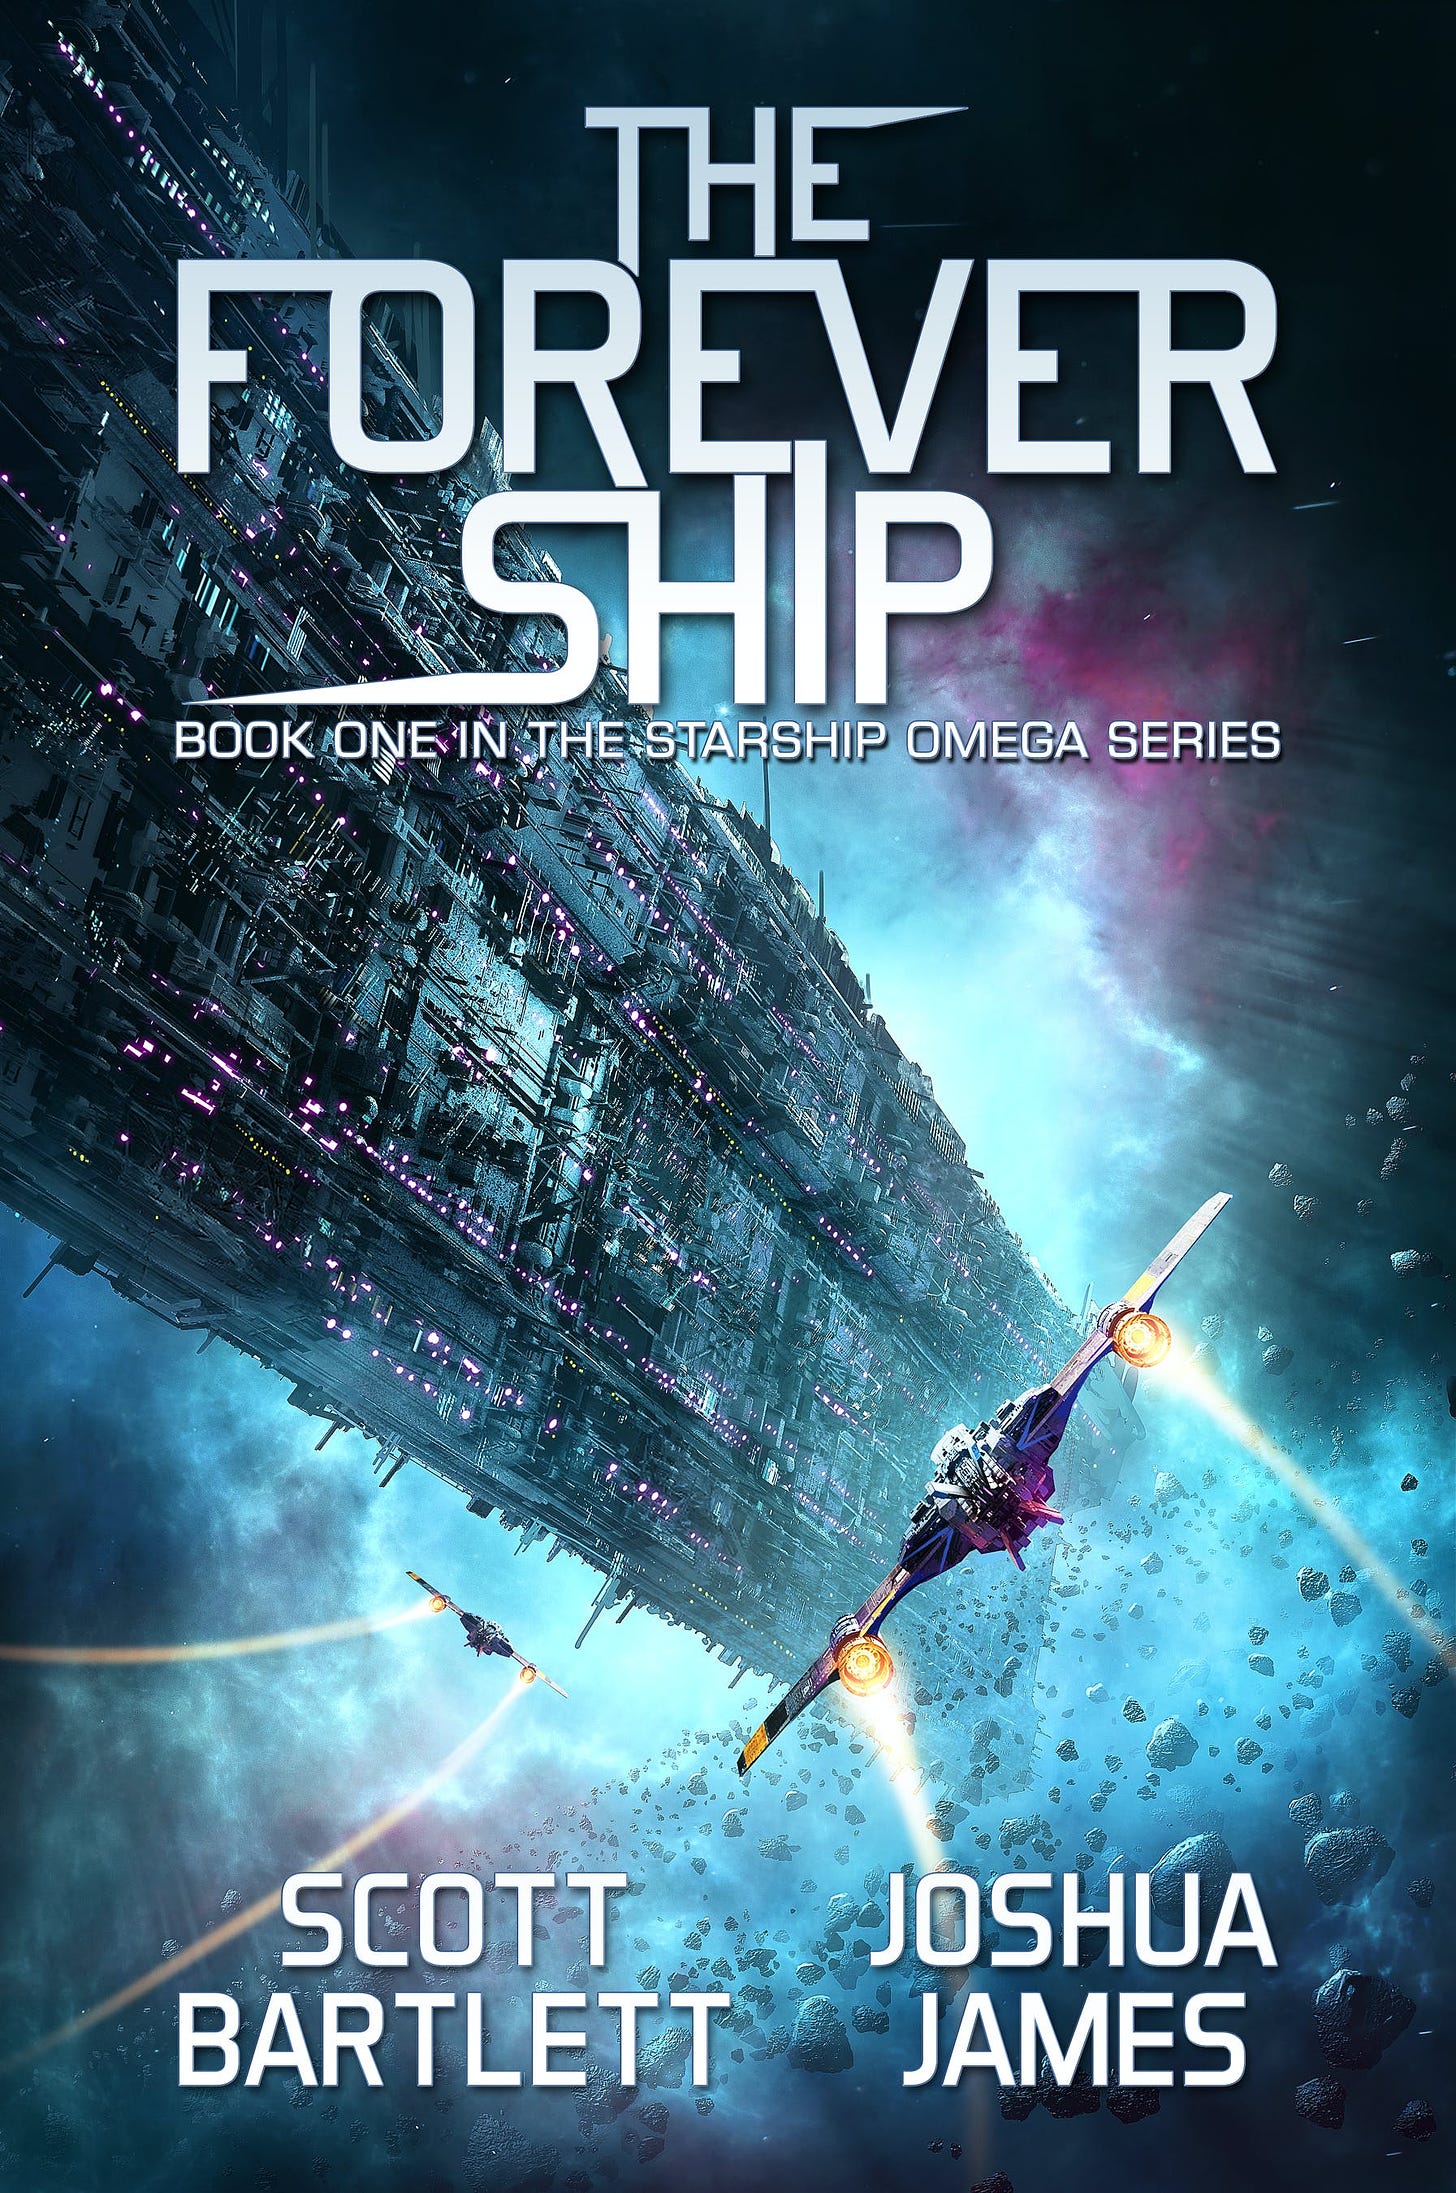 Ebook cover for The Forever Ship featuring giant ship and 2 star fighters